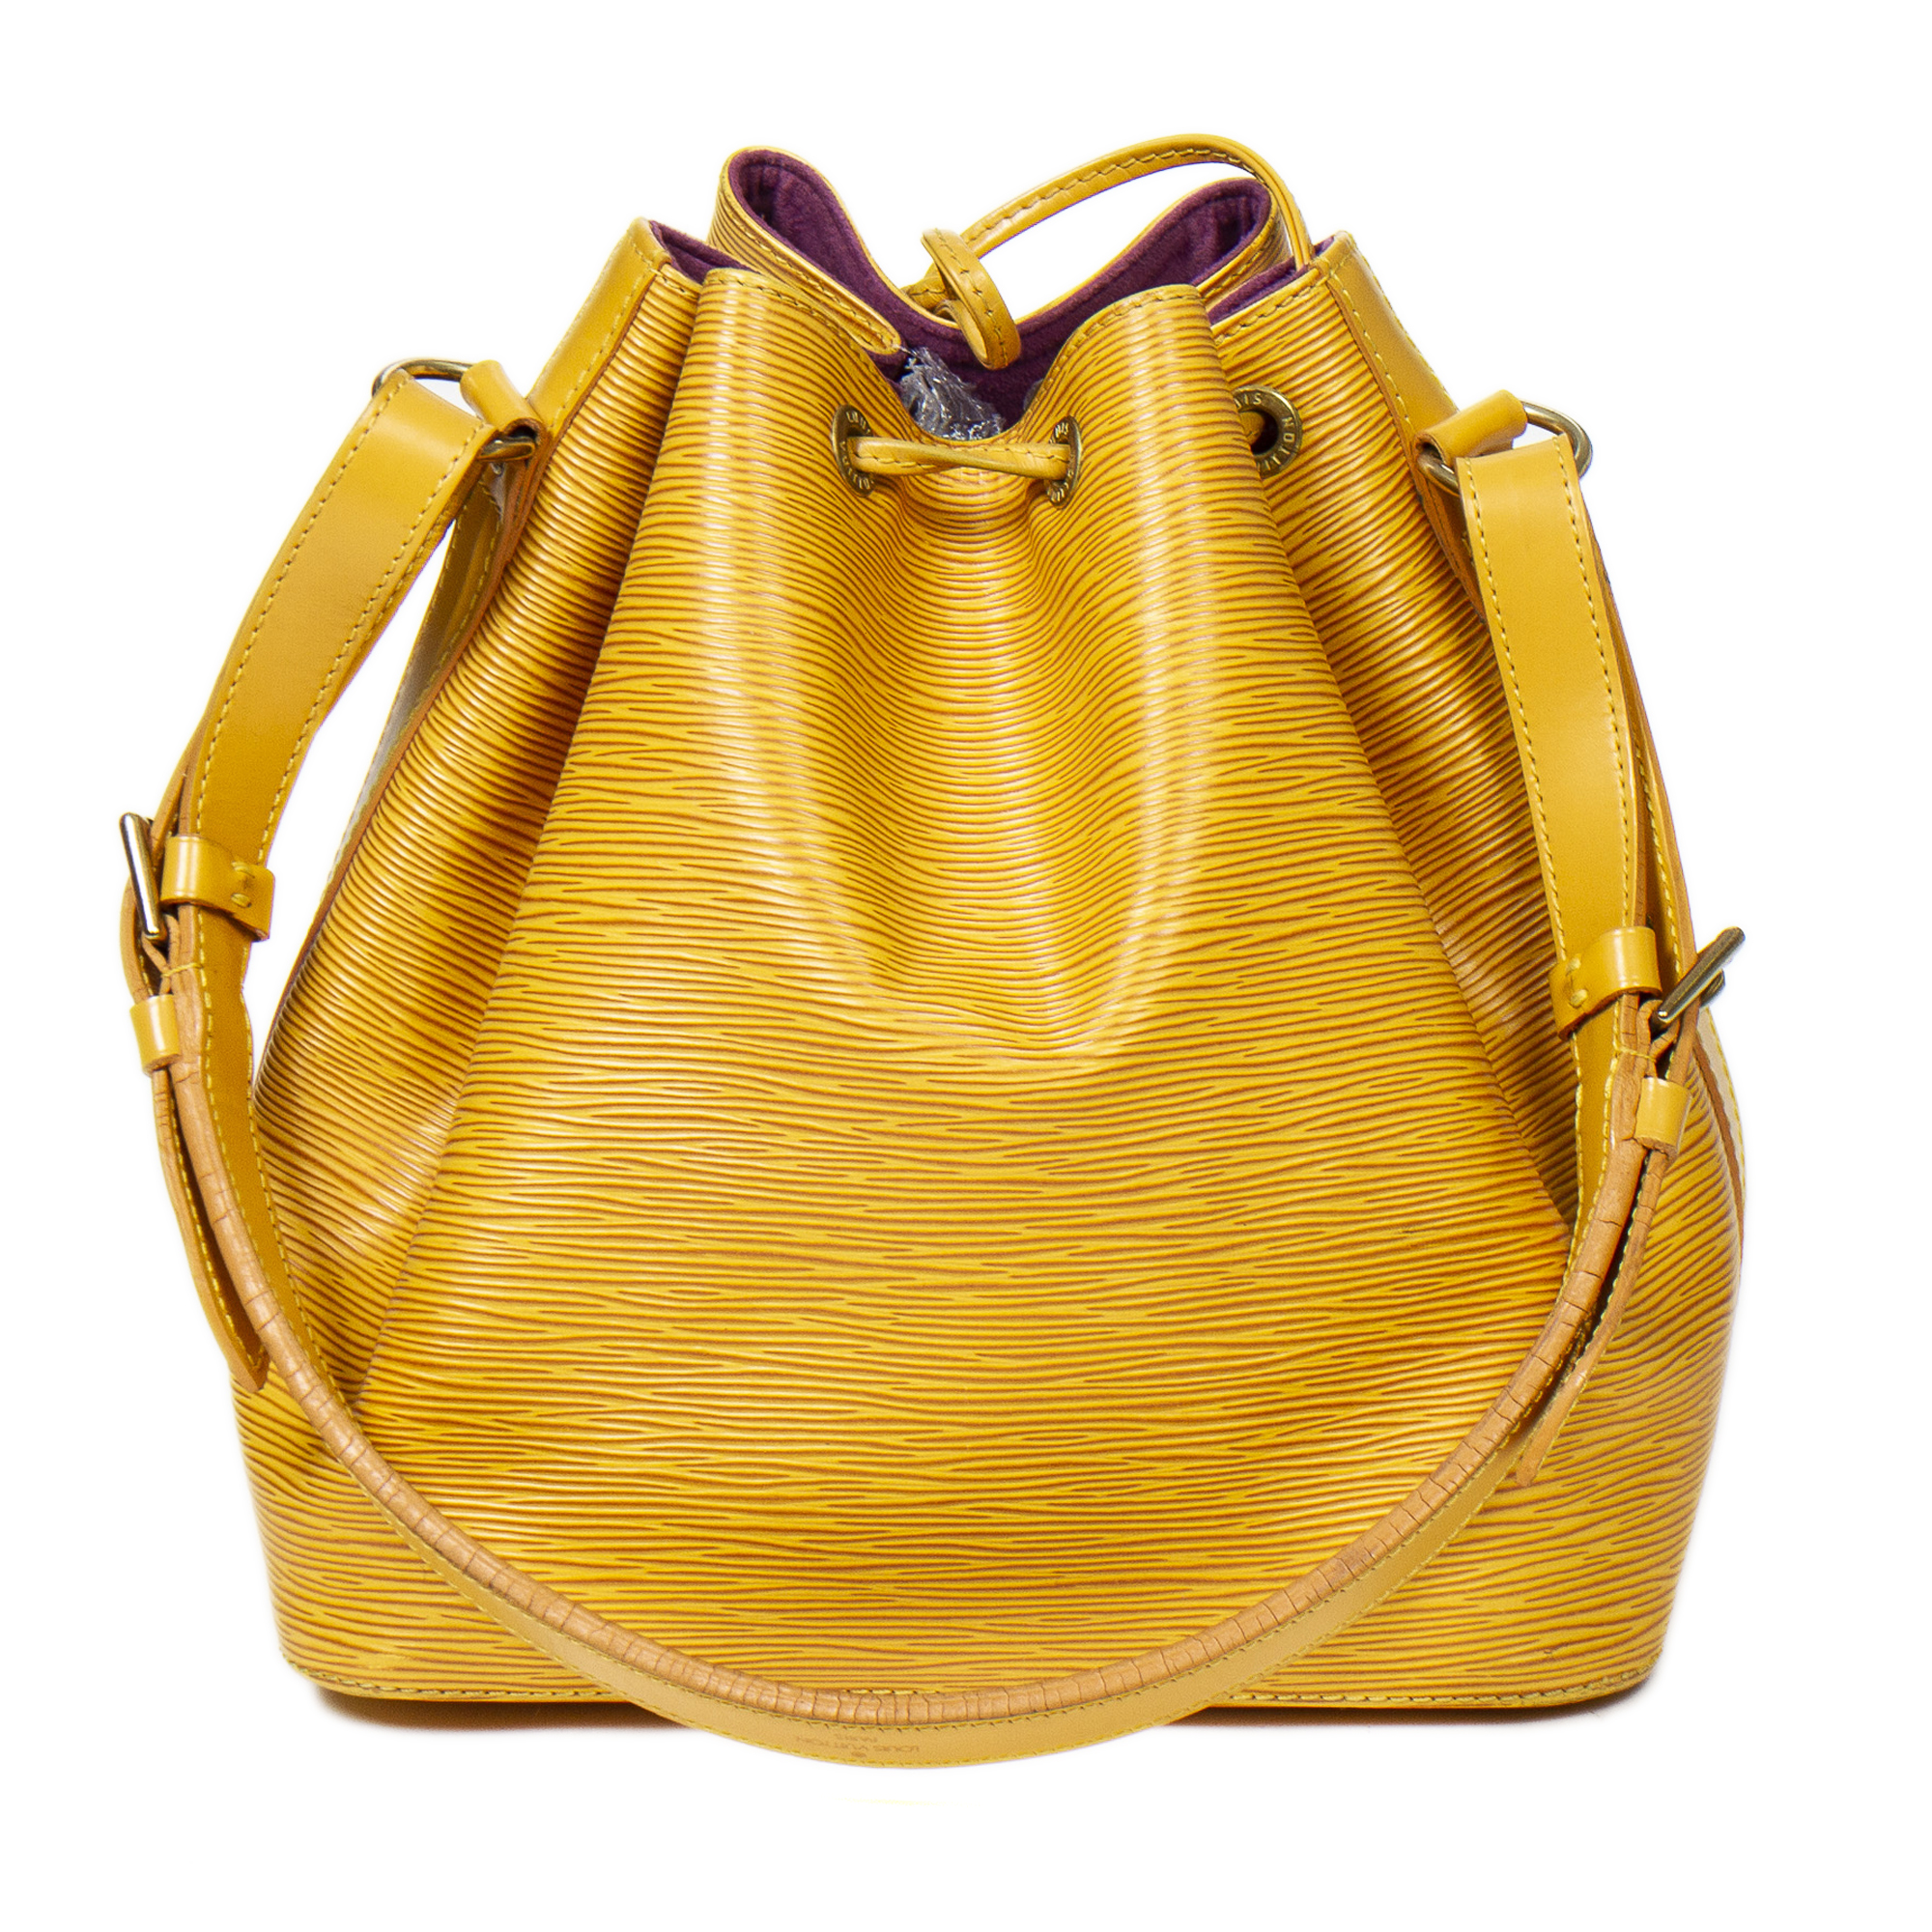 Louis Vuitton Noe PM Bucket Bag, in yellow epi leather with golden